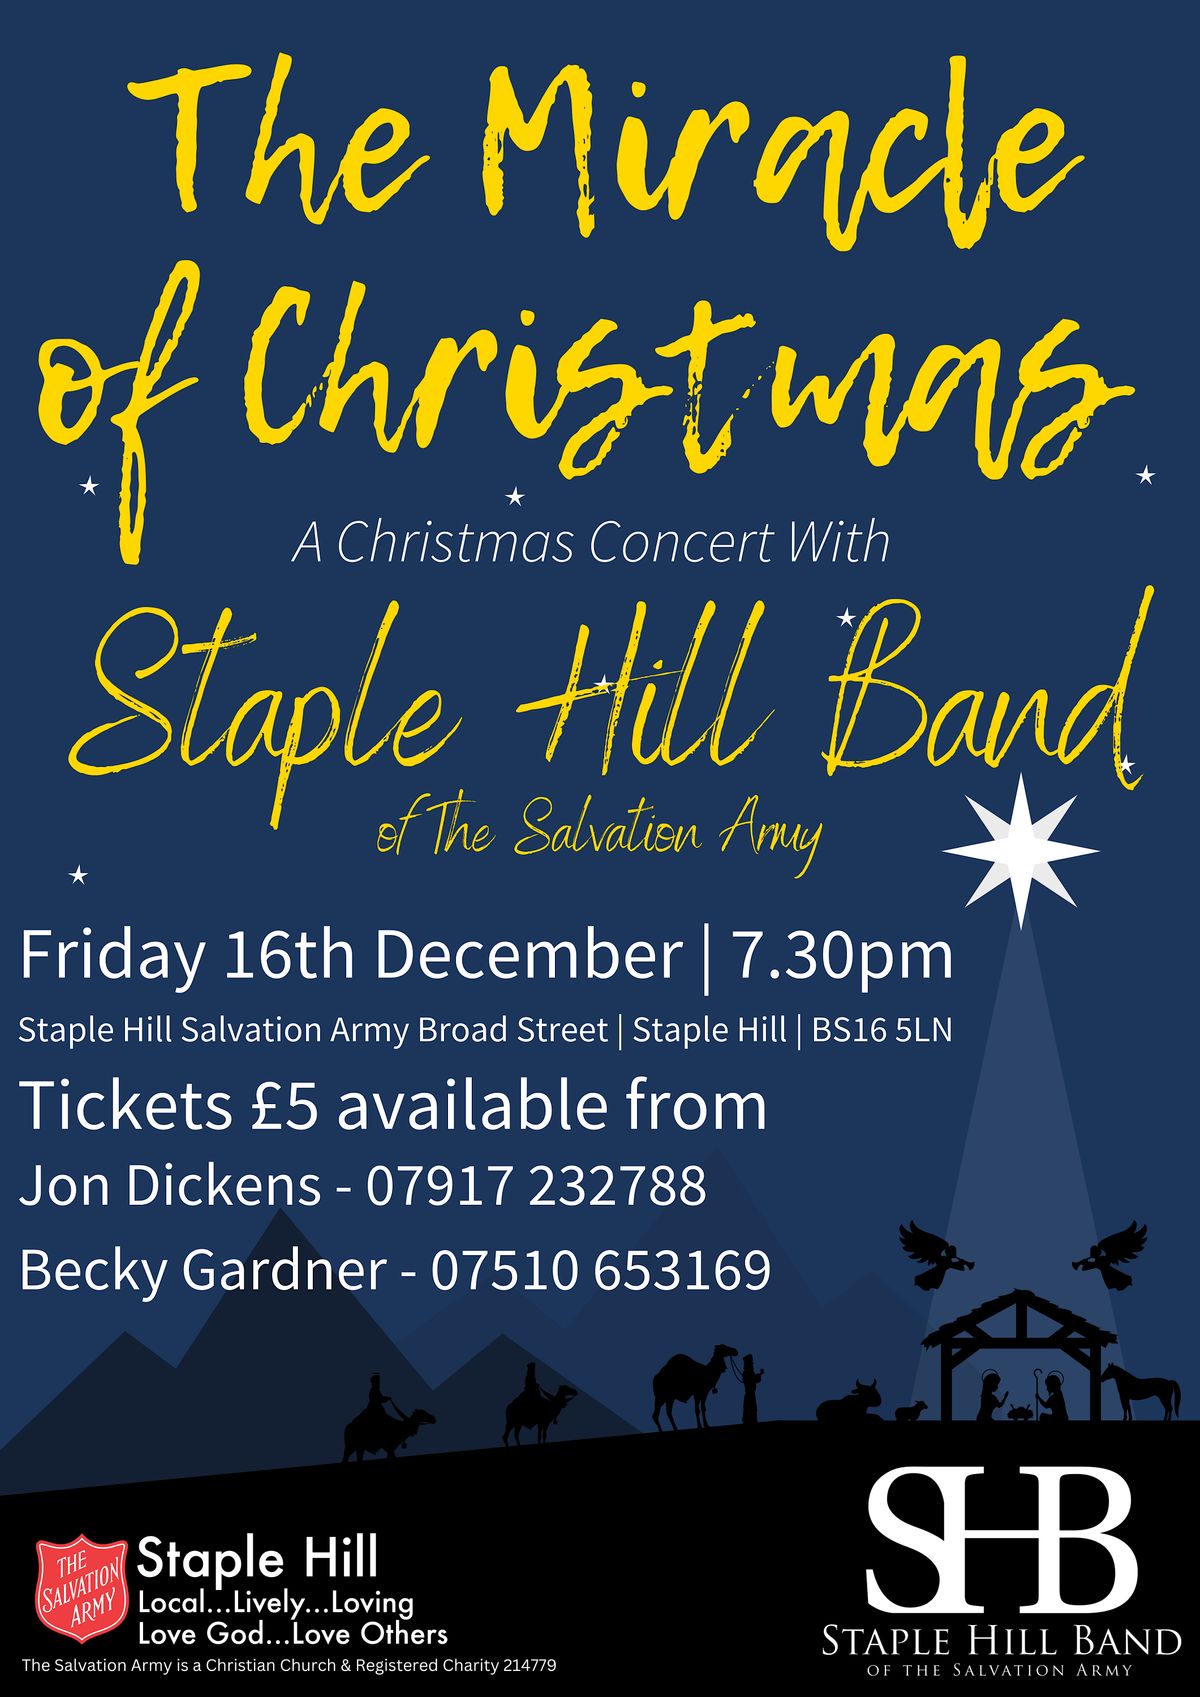 The Miracle of Christmas - A Concert by Staple Hill Salvation Army Band